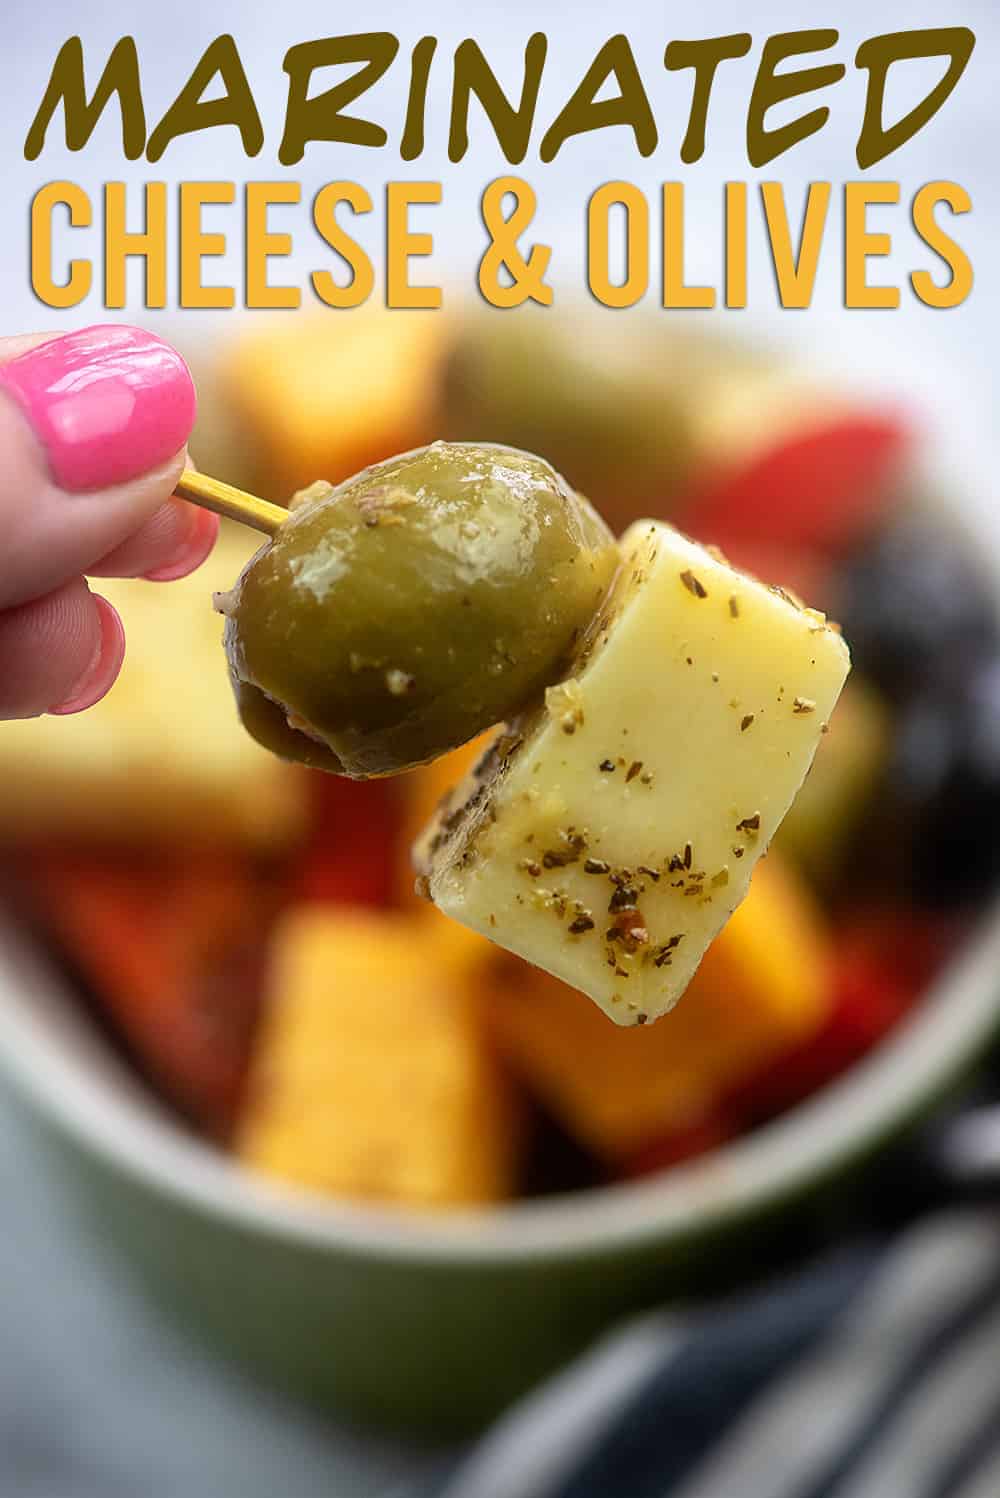 toothpick with olive and cheese